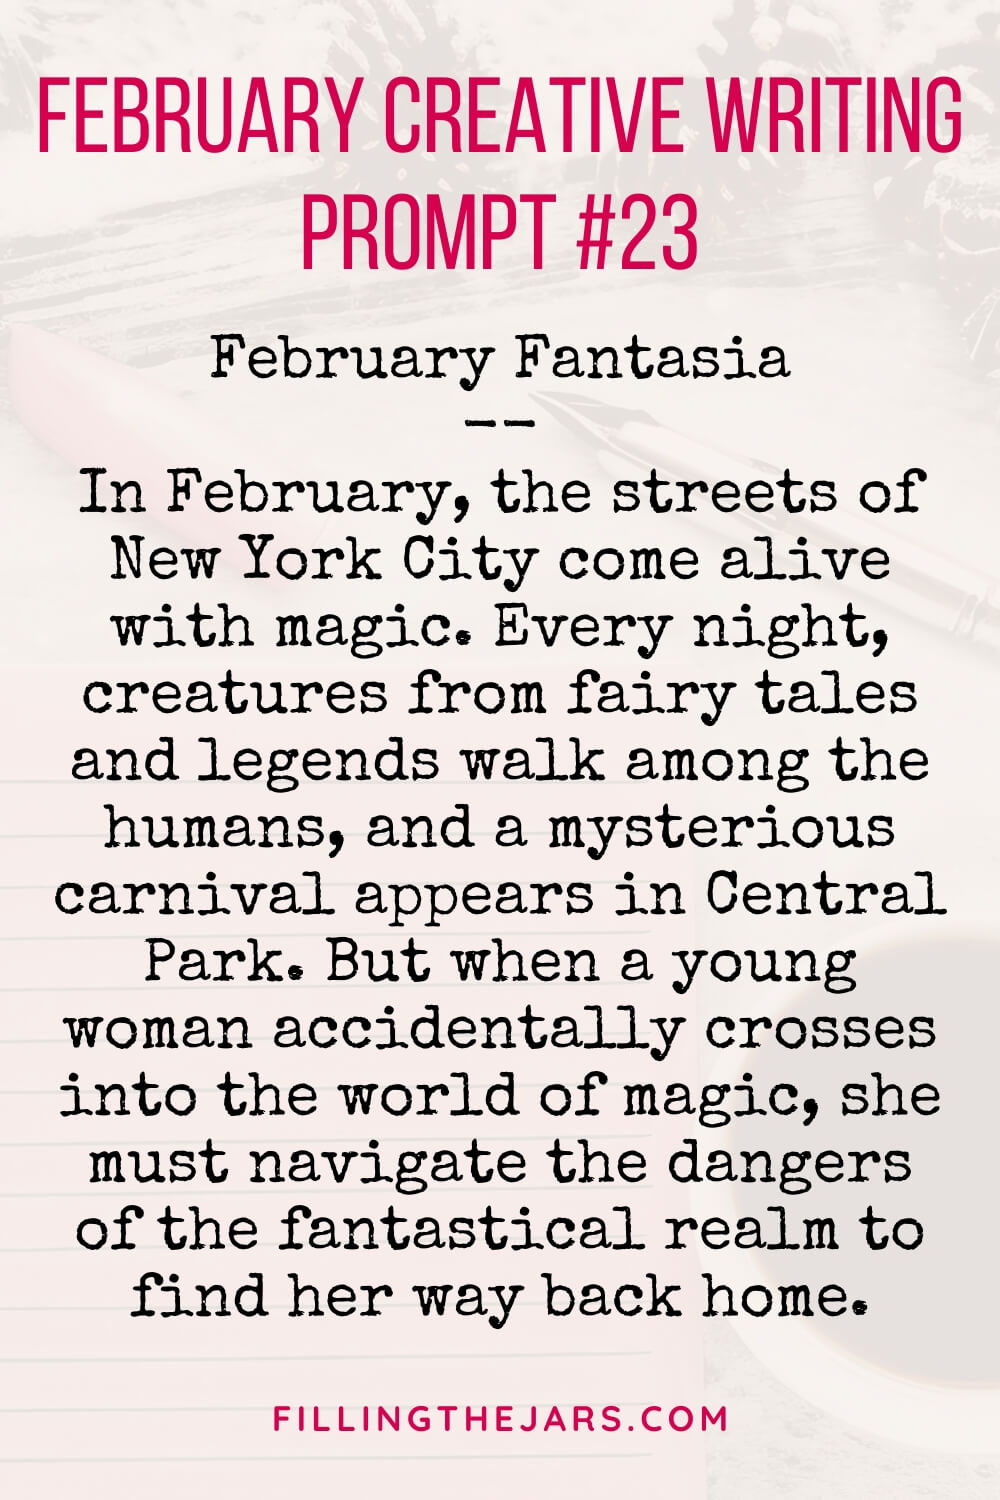 February-inspired fantasy writing prompt in dark pink and black text on light background.